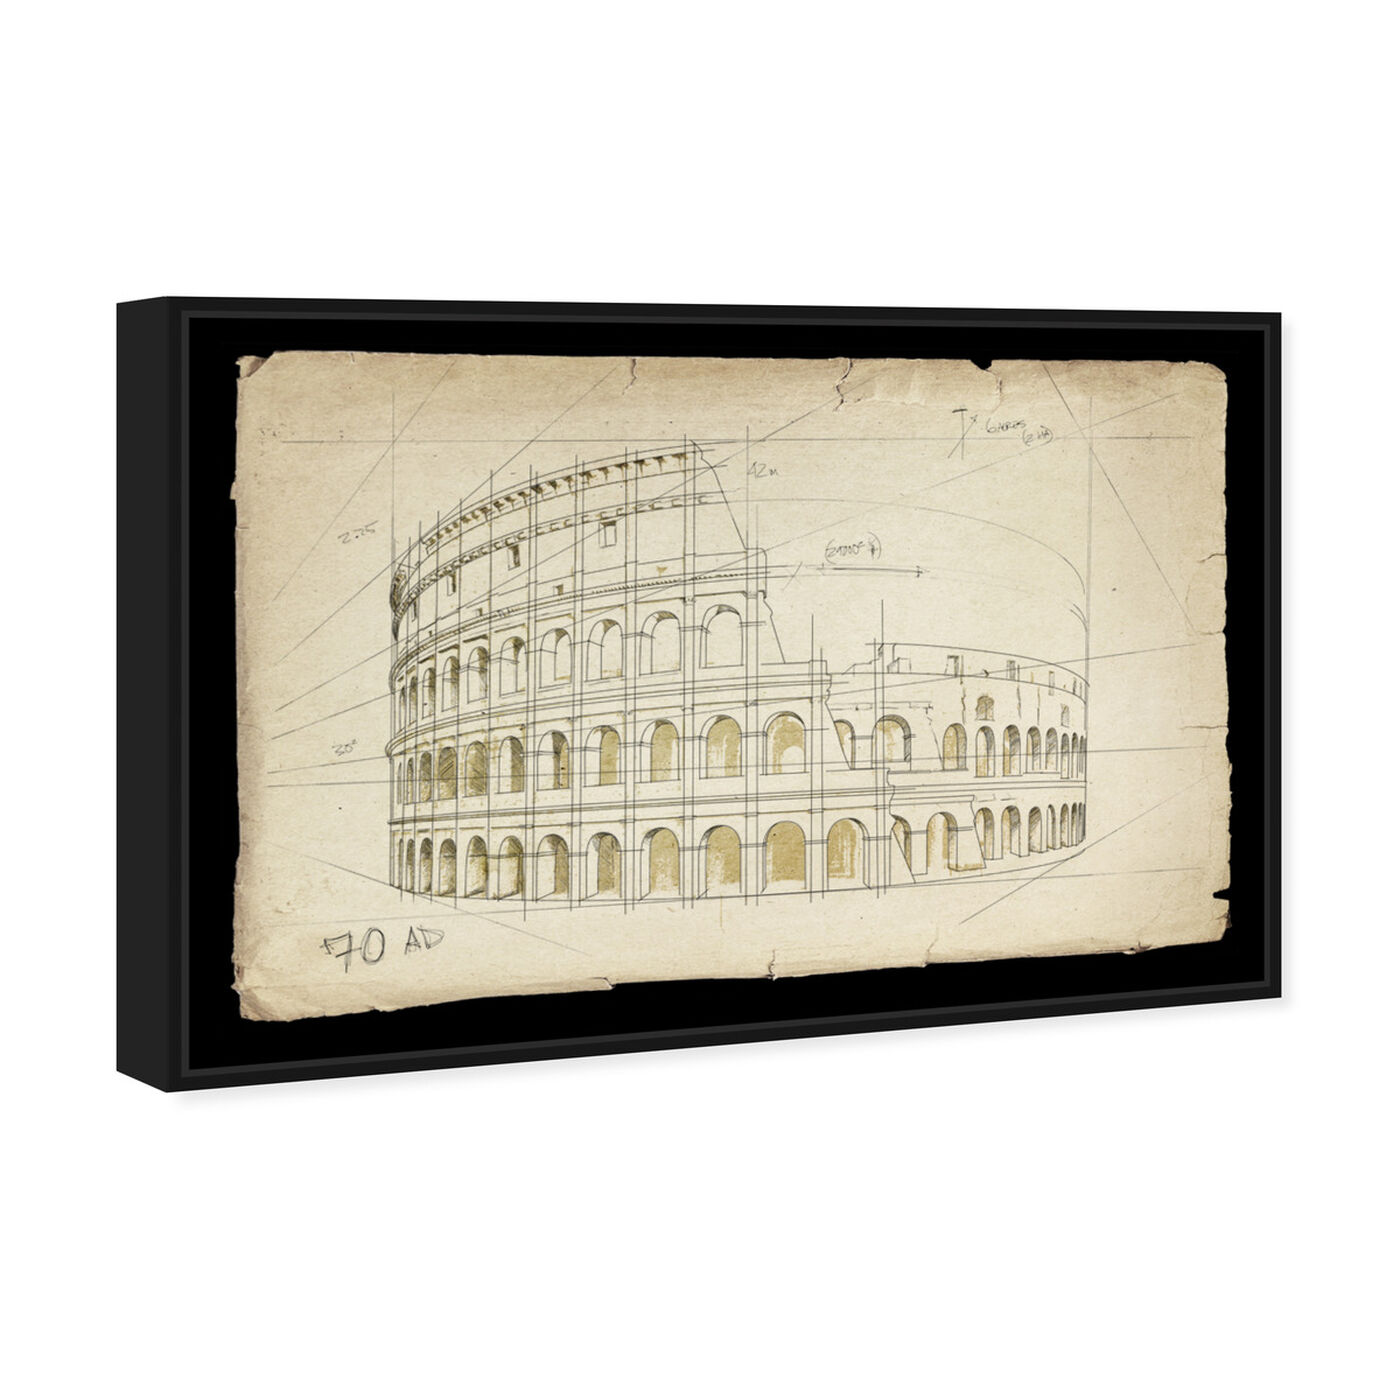 Angled view of Colosseum 70 AD featuring architecture and buildings and european buildings art.